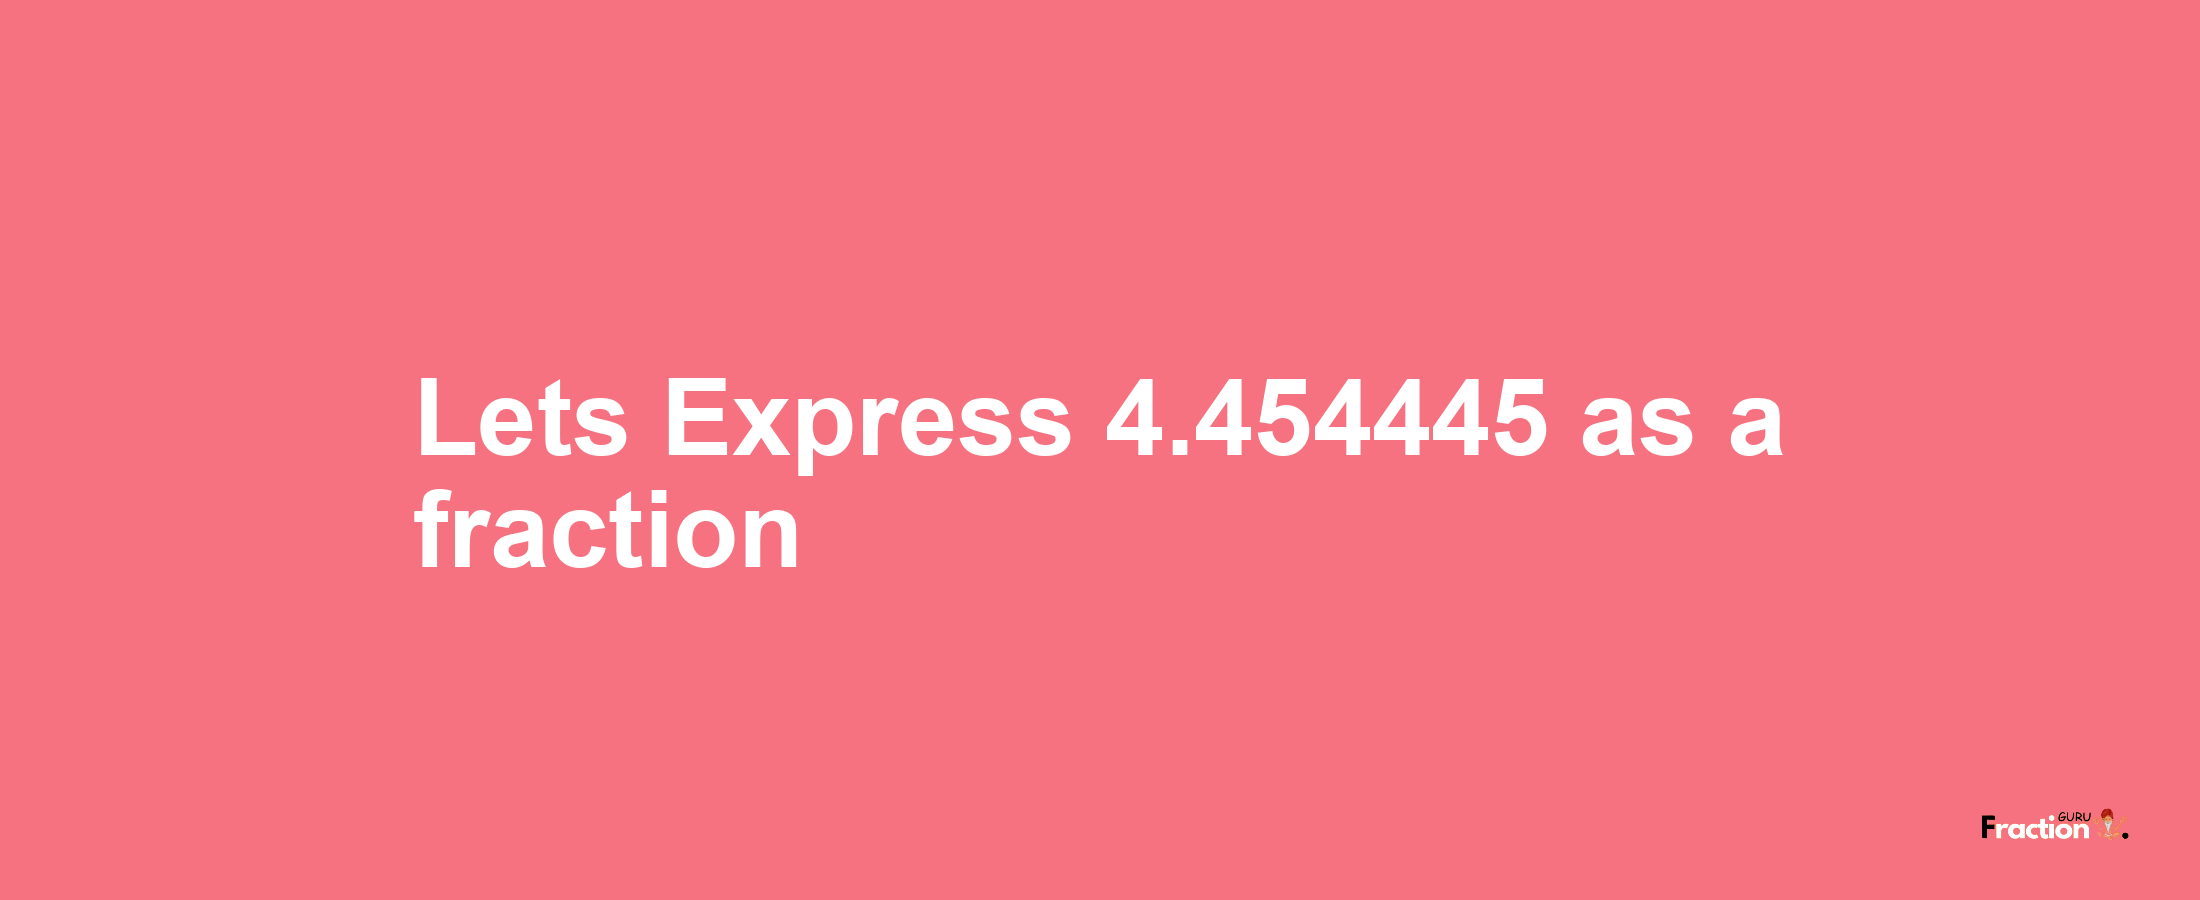 Lets Express 4.454445 as afraction